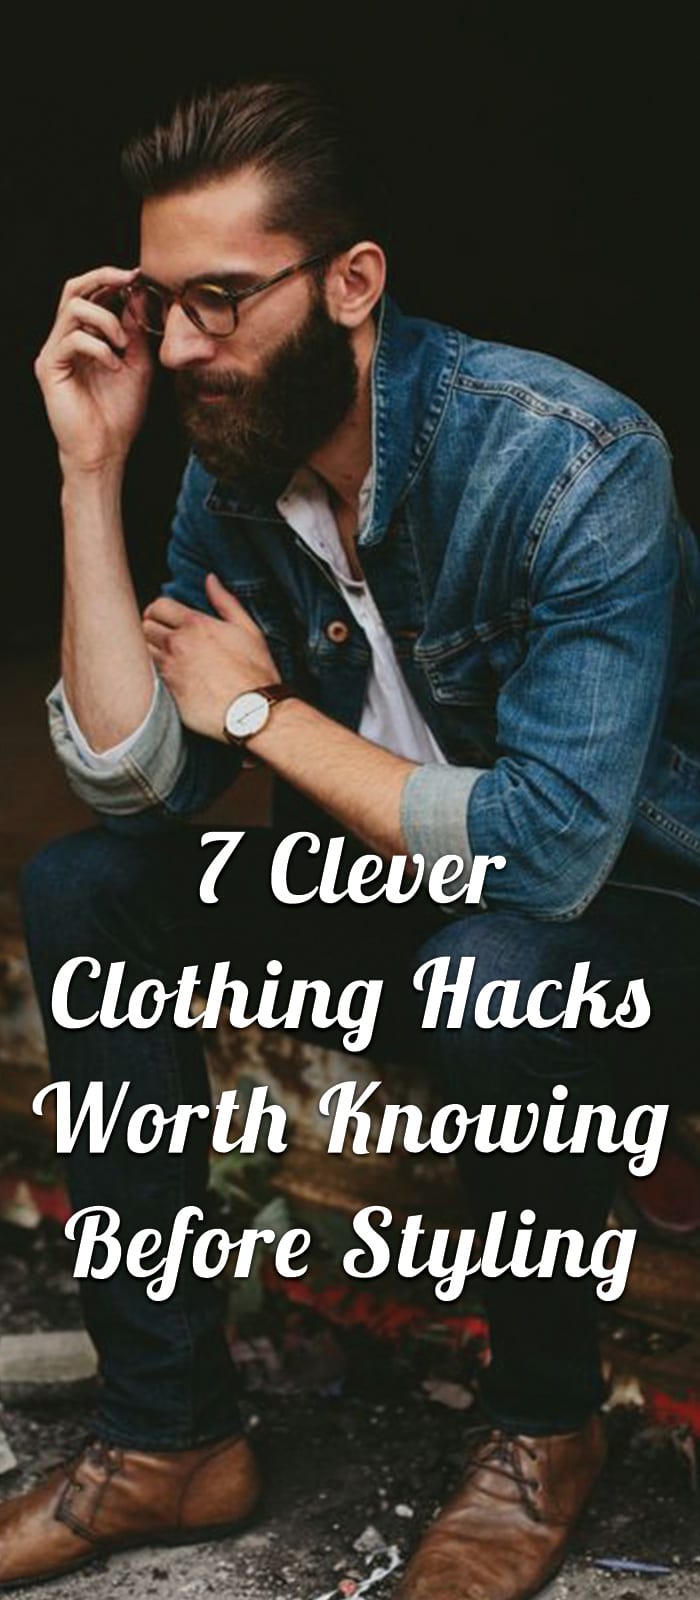 7-Clever-Clothing-Hacks-Worth-Knowing-Before-Styling